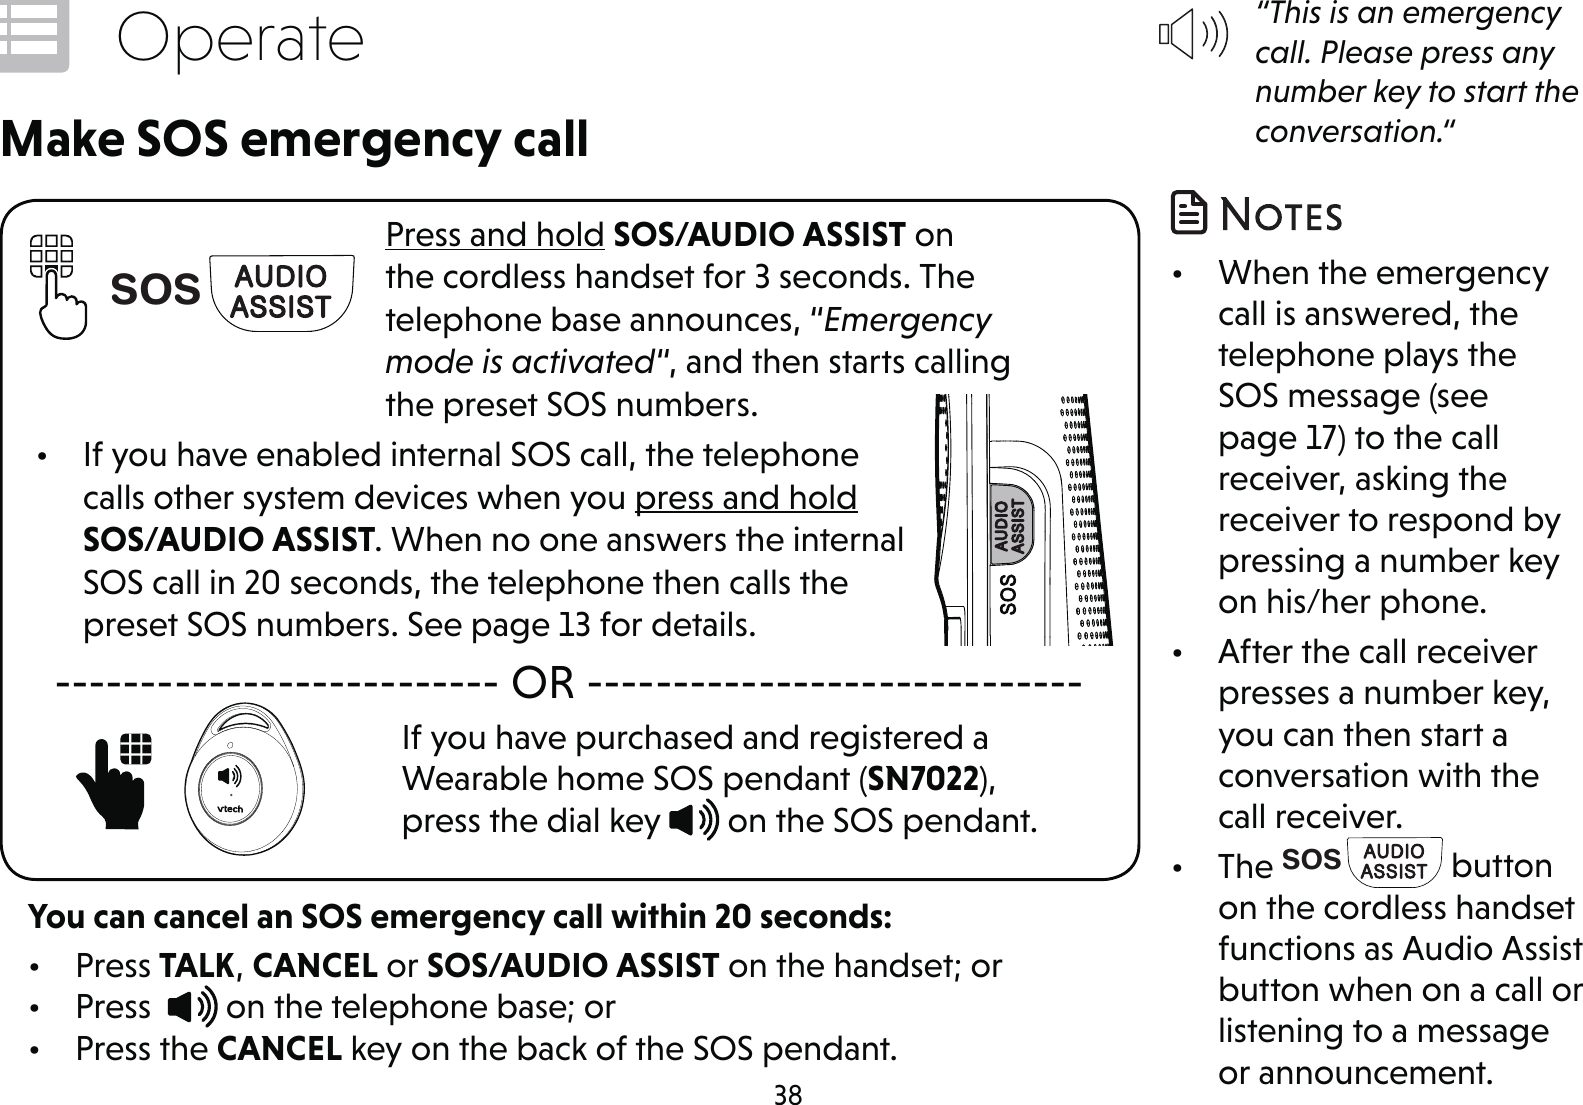 38OperatePress and hold SOS/AUDIO ASSIST on the cordless handset for 3 seconds. The telephone base announces, “Emergency mode is activated“, and then starts calling the preset SOS numbers.•  If you have enabled internal SOS call, the telephone calls other system devices when you press and hold SOS/AUDIO ASSIST. When no one answers the internal SOS call in 20 seconds, the telephone then calls the preset SOS numbers. See page 13 for details.Make SOS emergency call-------------------------- OR -----------------------------If you have purchased and registered a Wearable home SOS pendant (SN7022), press the dial key   on the SOS pendant.     SOSYou can cancel an SOS emergency call within 20 seconds:• Press TALK, CANCEL or SOS/AUDIO ASSIST on the handset; or• Press    on the telephone base; or• Press the CANCEL key on the back of the SOS pendant.“This is an emergency call. Please press any number key to start the conversation.“•  When the emergency call is answered, the telephone plays the SOS message (see page 17) to the call receiver, asking the receiver to respond by pressing a number key on his/her phone.•  After the call receiver presses a number key, you can then start a conversation with the call receiver.• The SOS  button on the cordless handset functions as Audio Assist button when on a call or listening to a message or announcement.